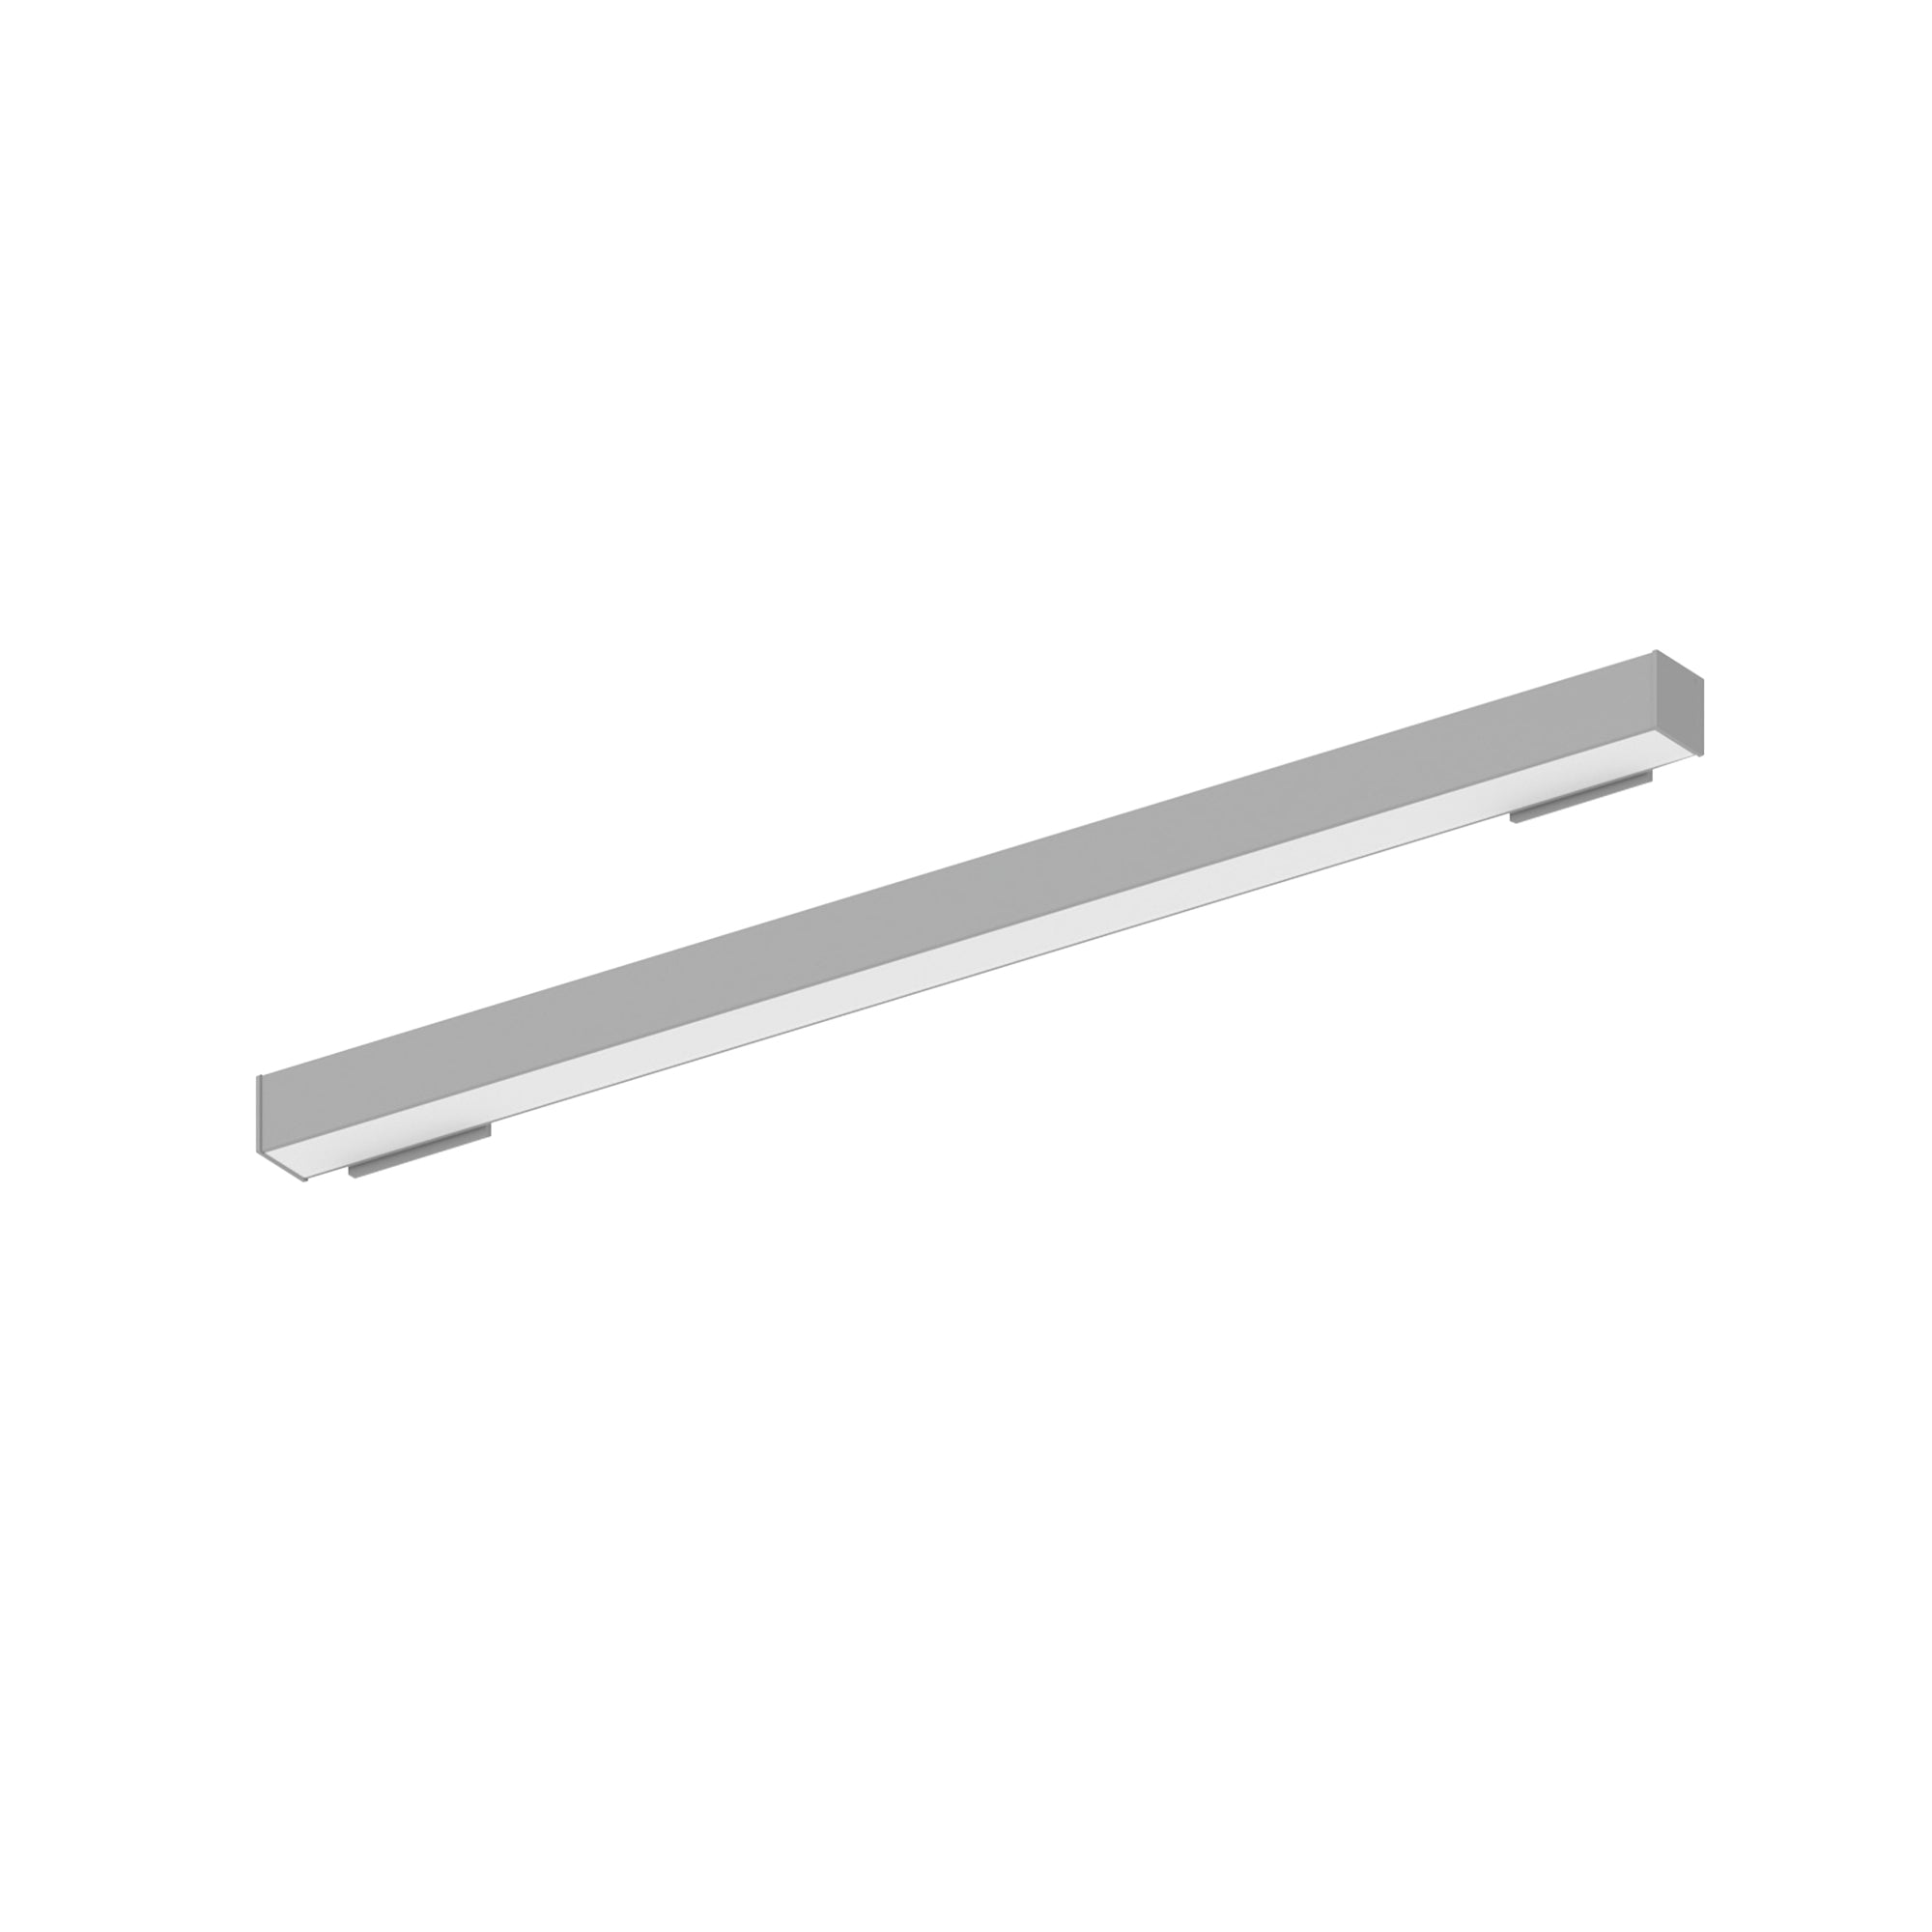 Nora Lighting NWLIN-41035A/L2P-R2 - Linear - 4' L-Line LED Wall Mount Linear, 4200lm / 3500K, 2 Inchx4 Inch Left Plate & 2 Inchx4 Inch Right Plate, Left Power Feed, Aluminum Finish